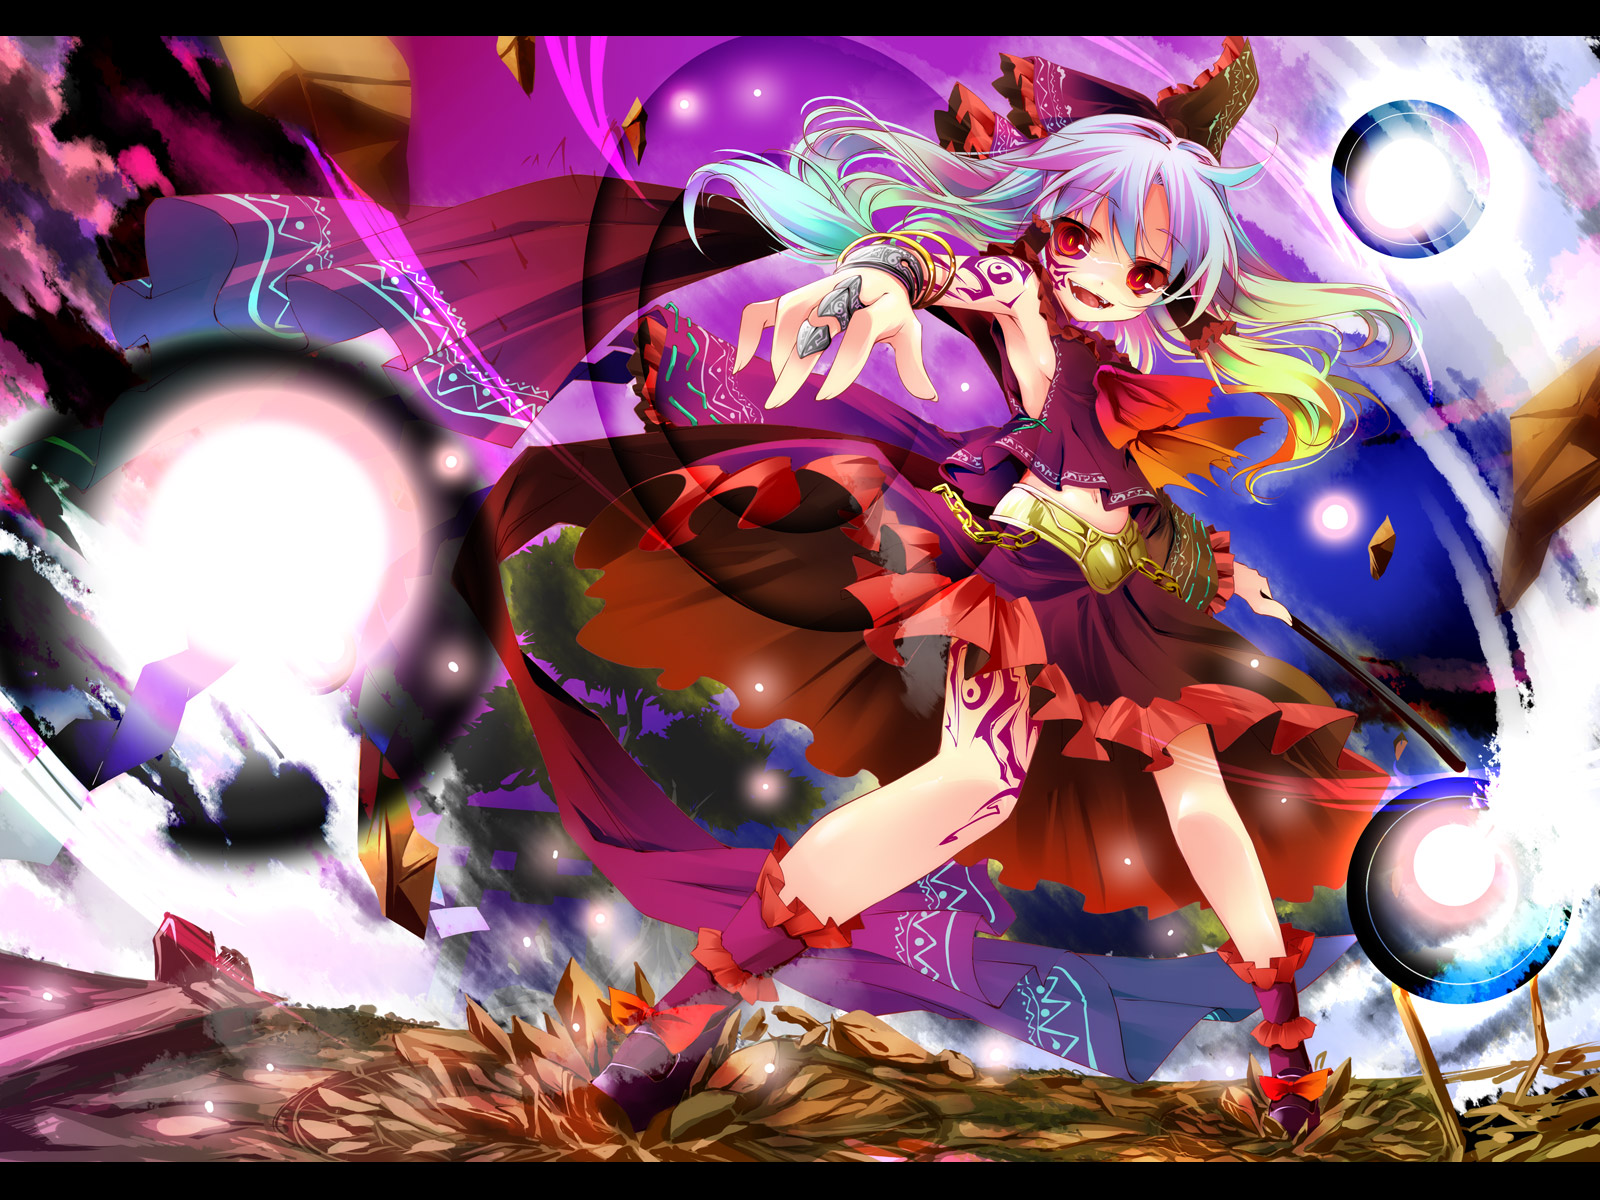 Touhou Project - Страница 15 976f3862185d12d32b221bf82f819995